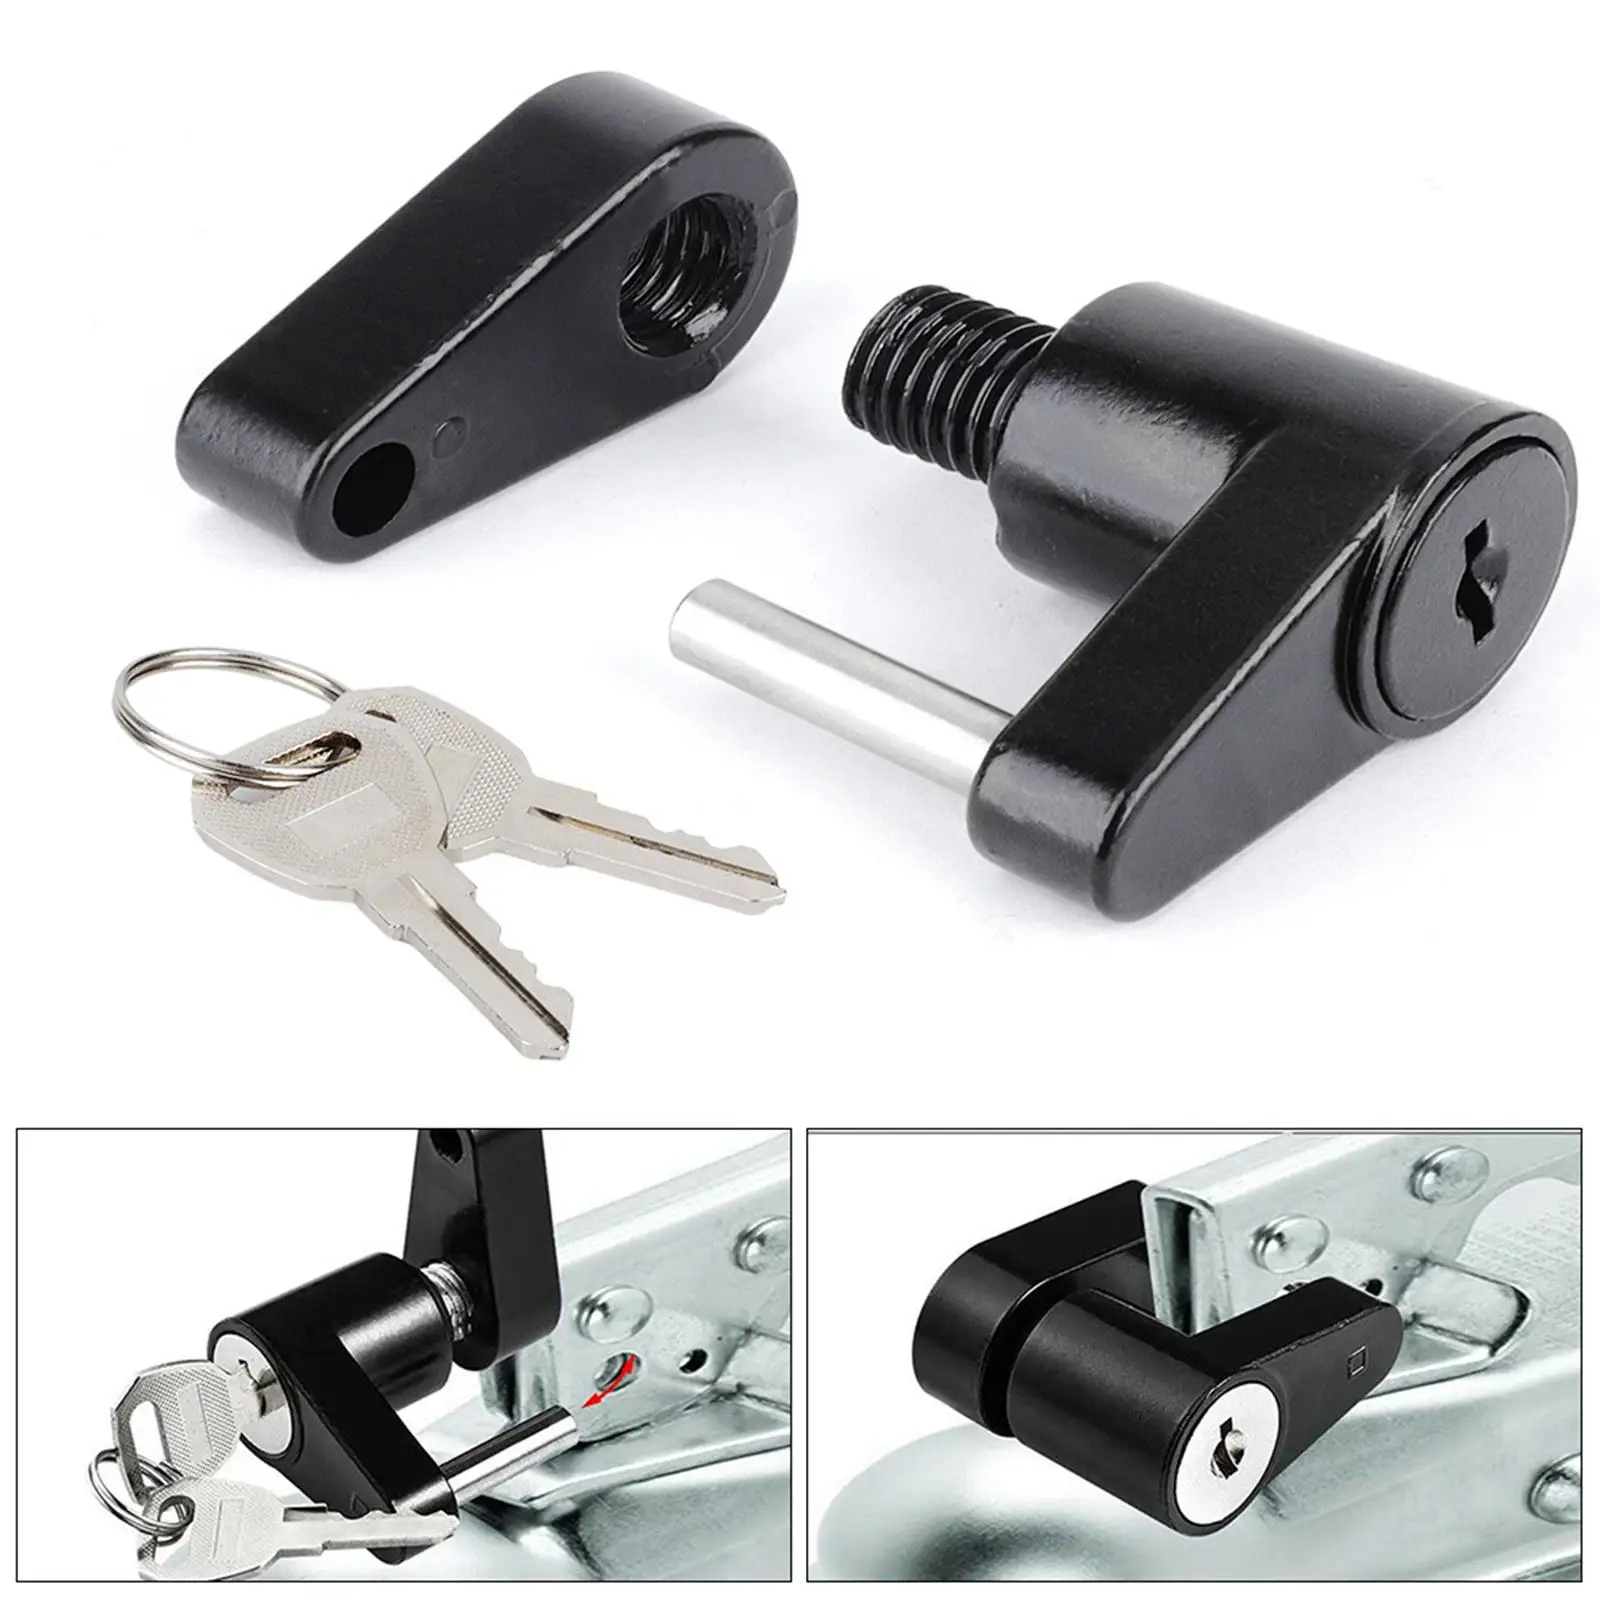 Trailer Hitch Coupler Lock with 2 Keys for Tow Boat Car Coupling Lock